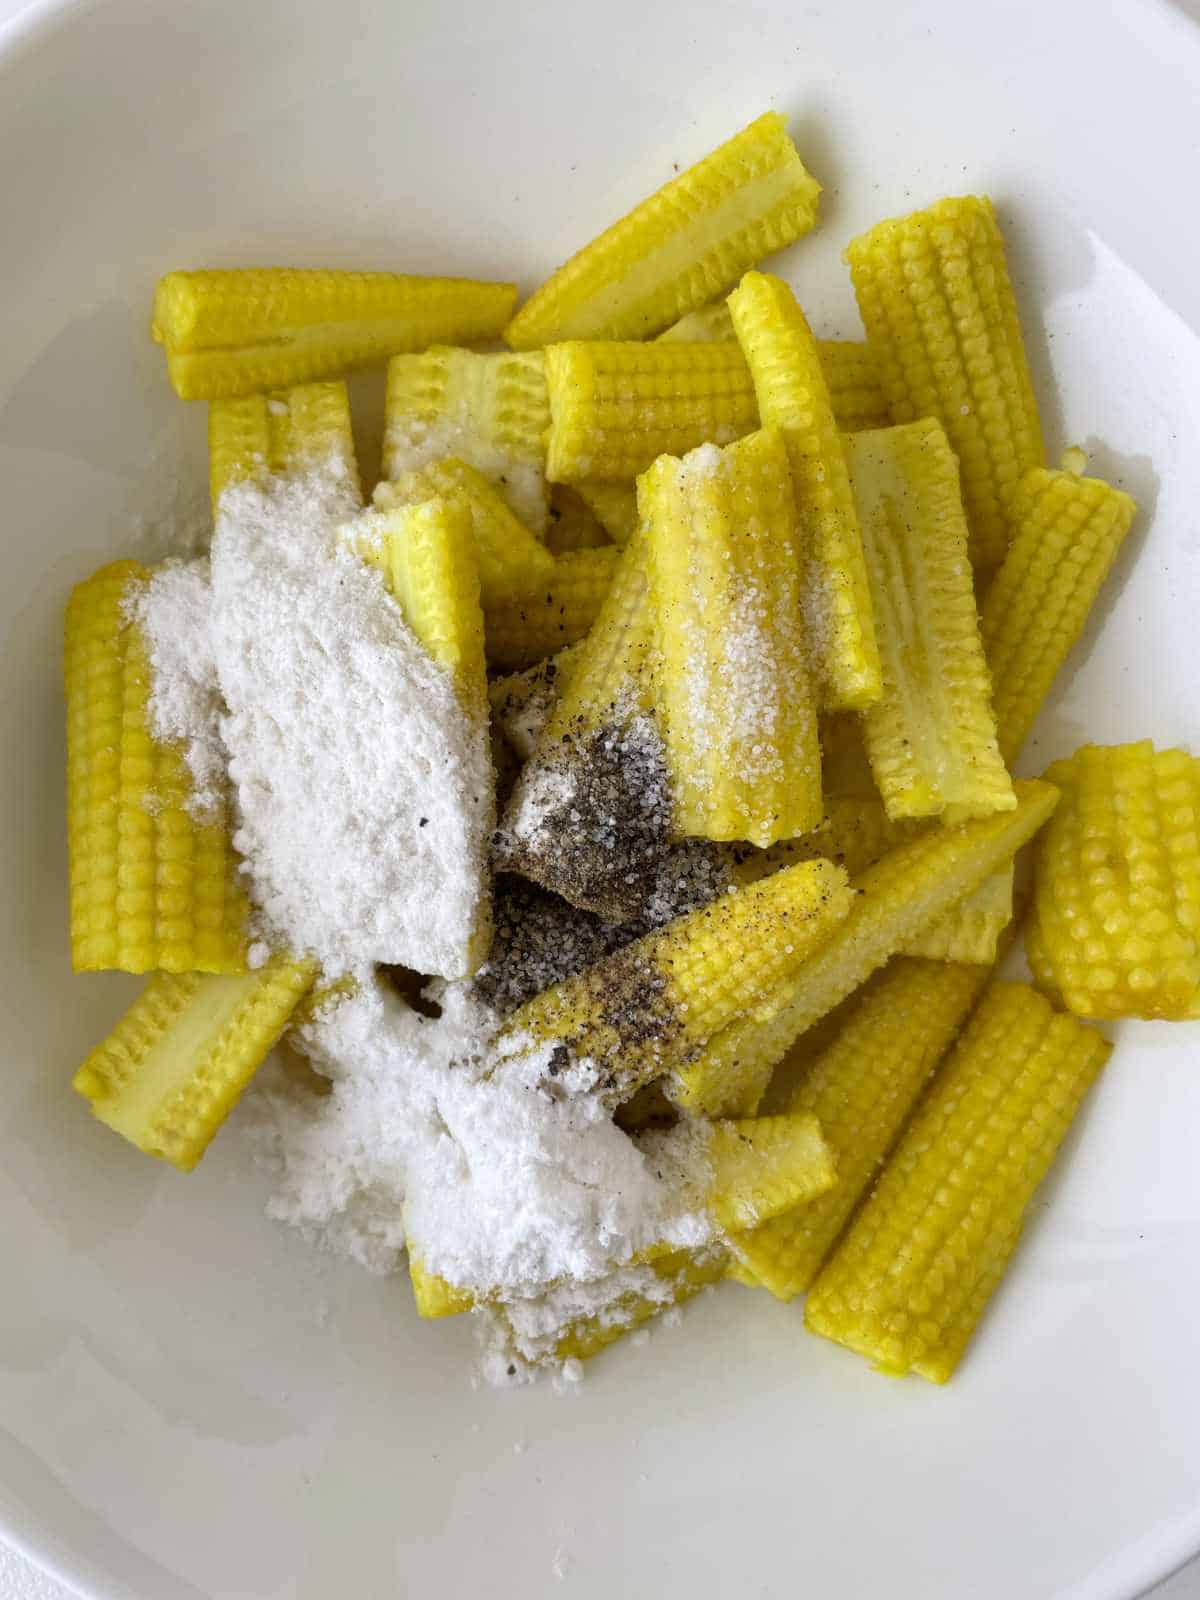 boiled baby corn with cornstarch and seasoning in a bowl.